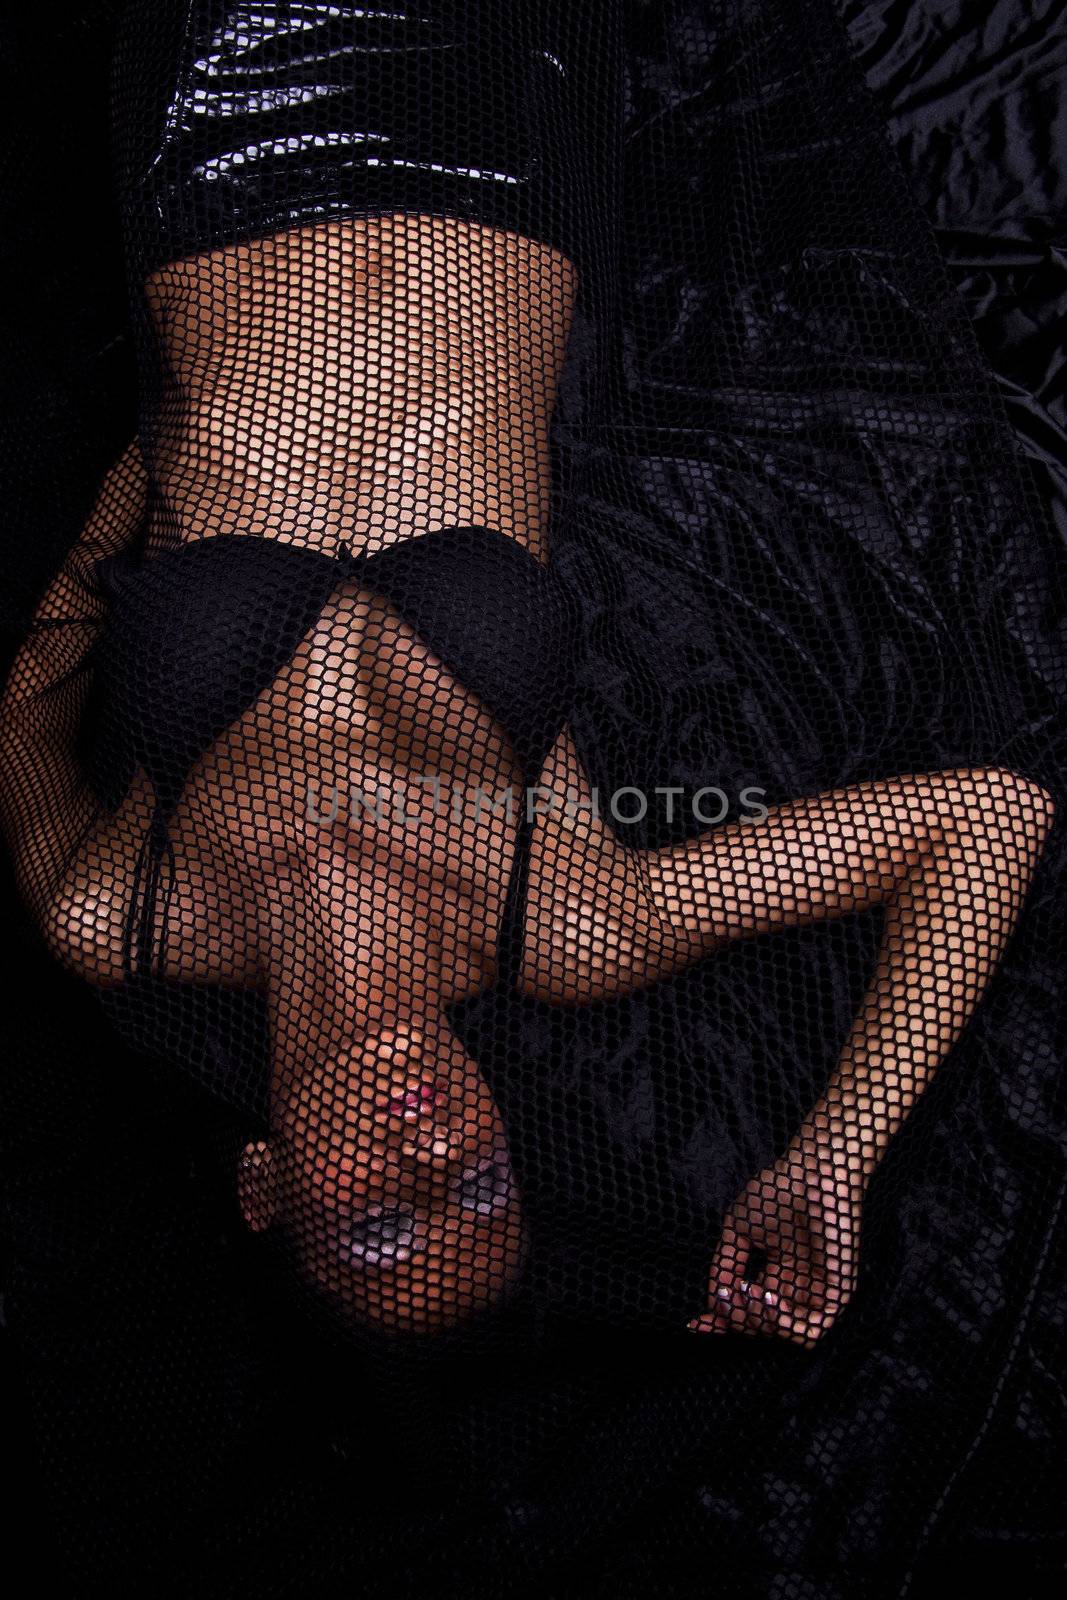 Woman Trapped In Black Fishnet by adamr